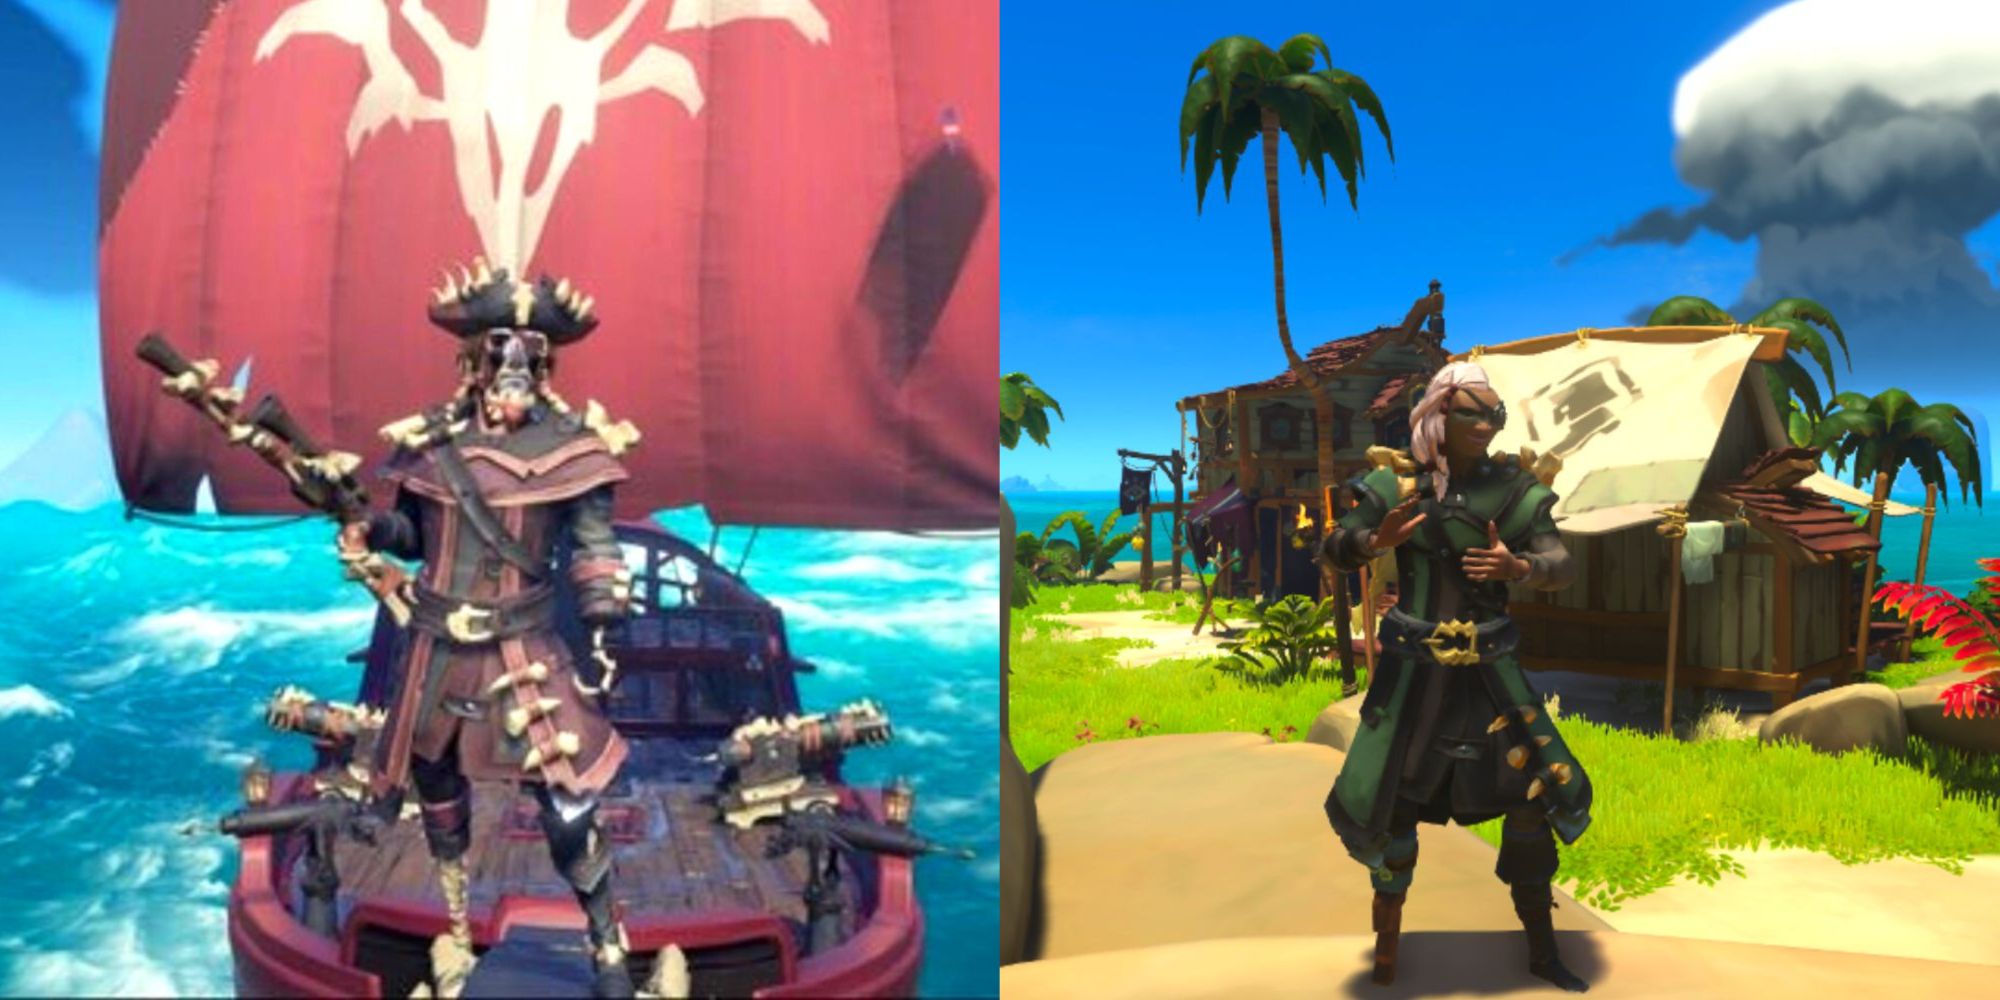 The Bone Crusher And Fearless Bone Crusher Outfit Sets In Sea Of Thieves